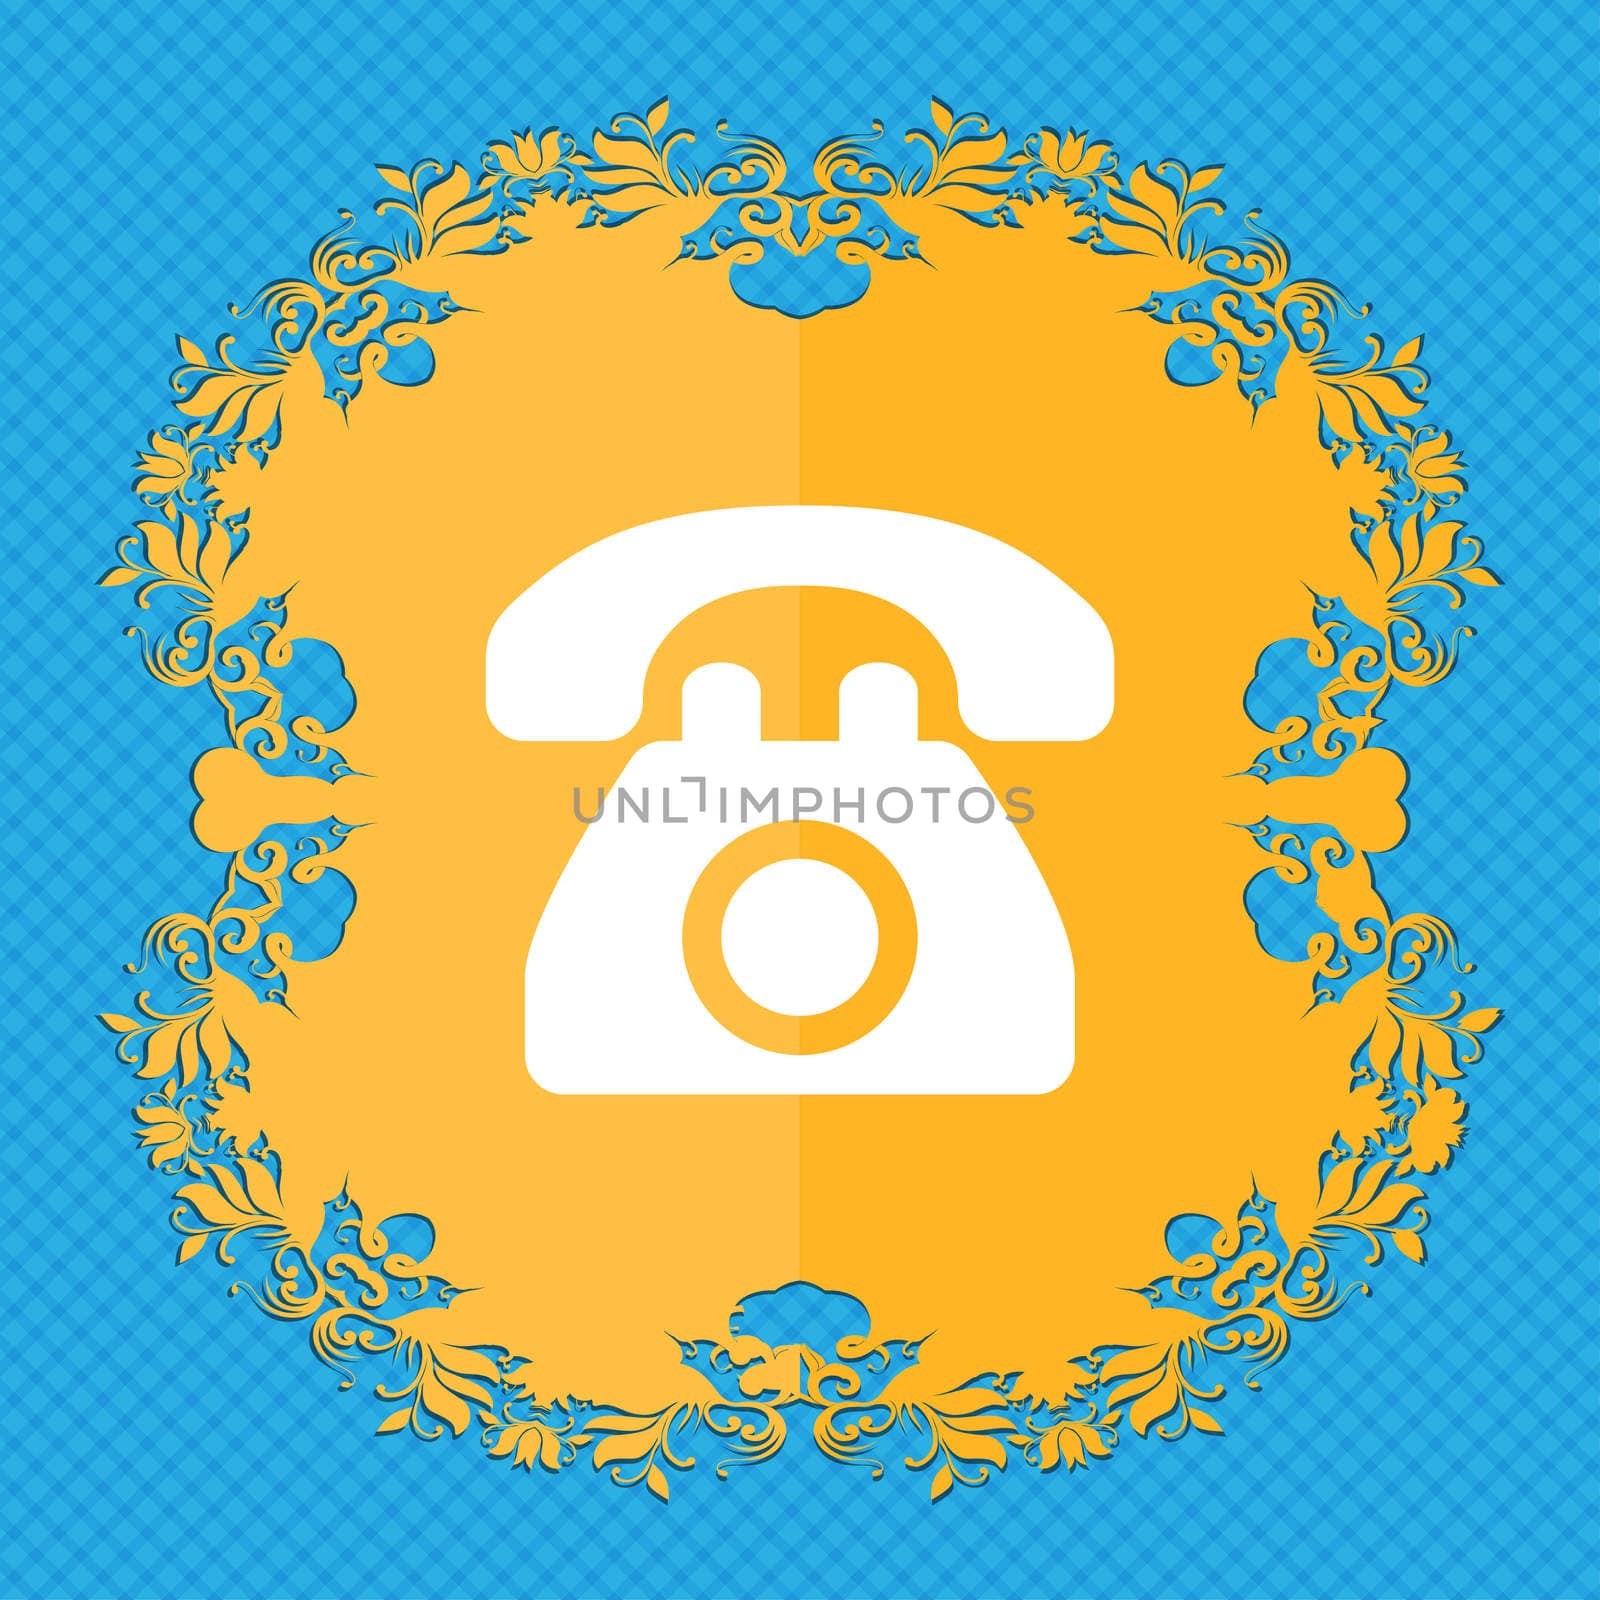 Retro telephone . Floral flat design on a blue abstract background with place for your text. illustration